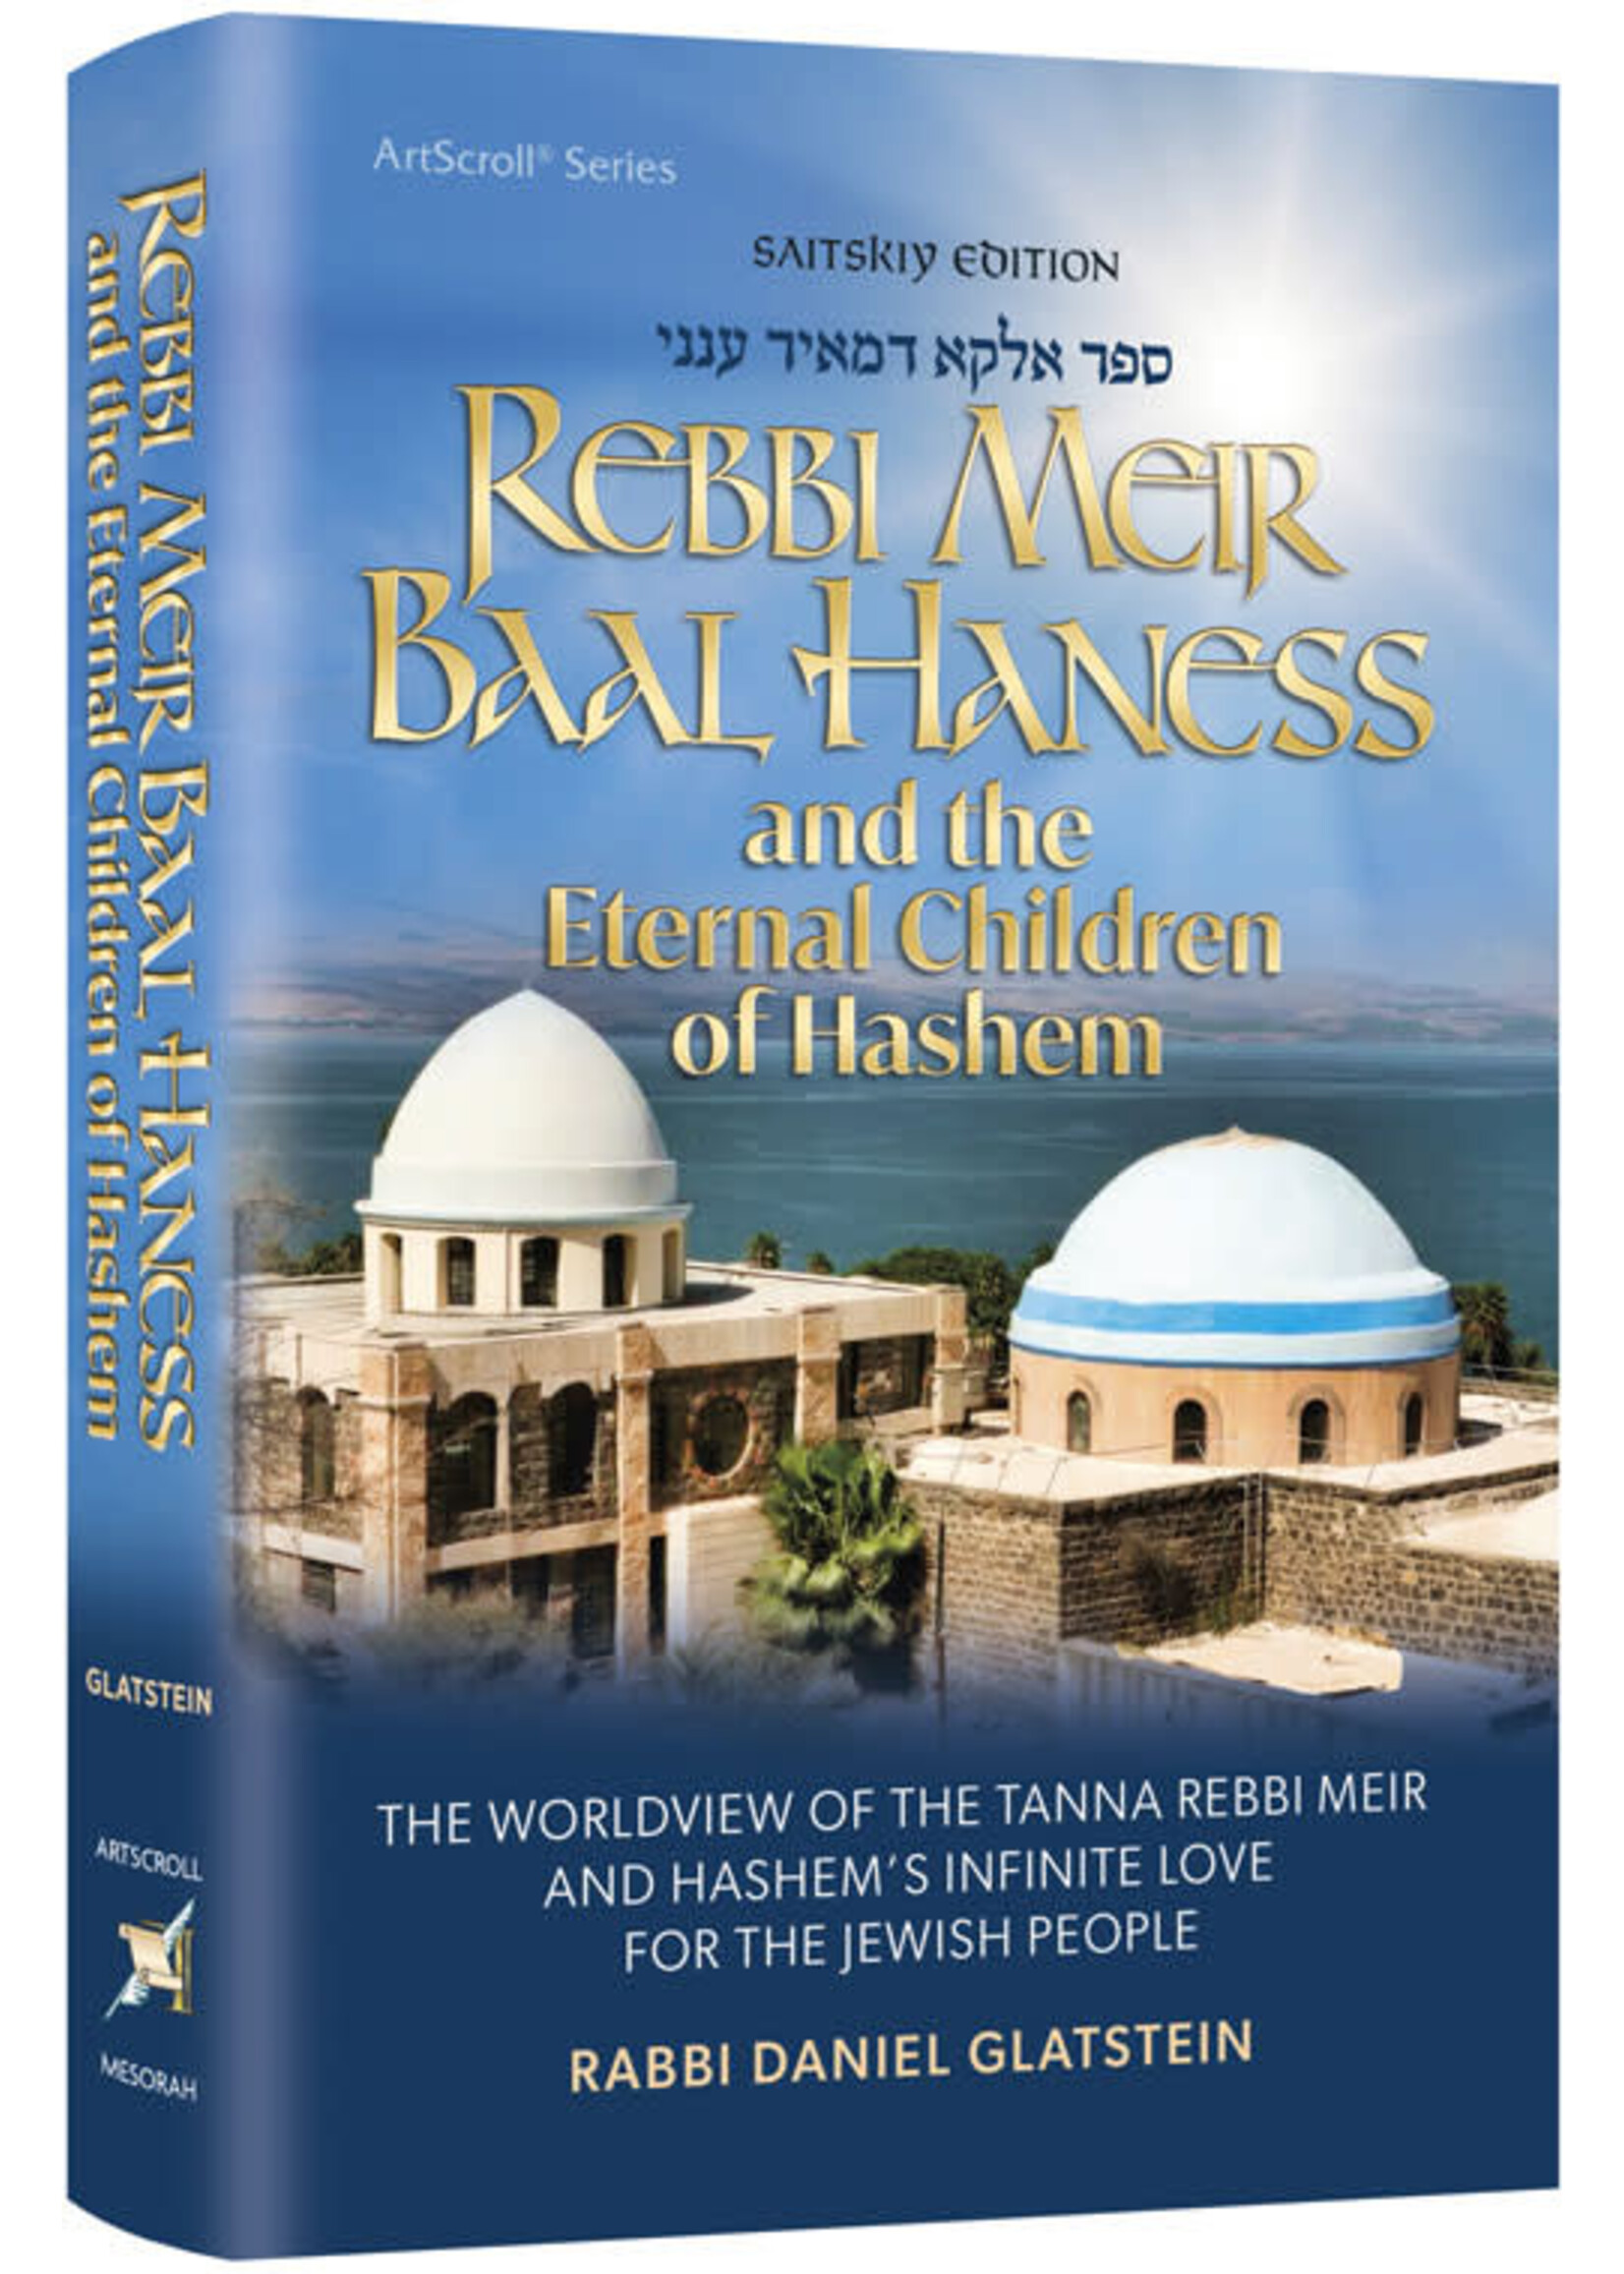 REBBI MEIR BAAL HAANESS AND THE ETERNAL CHILDREN OF HASHEM